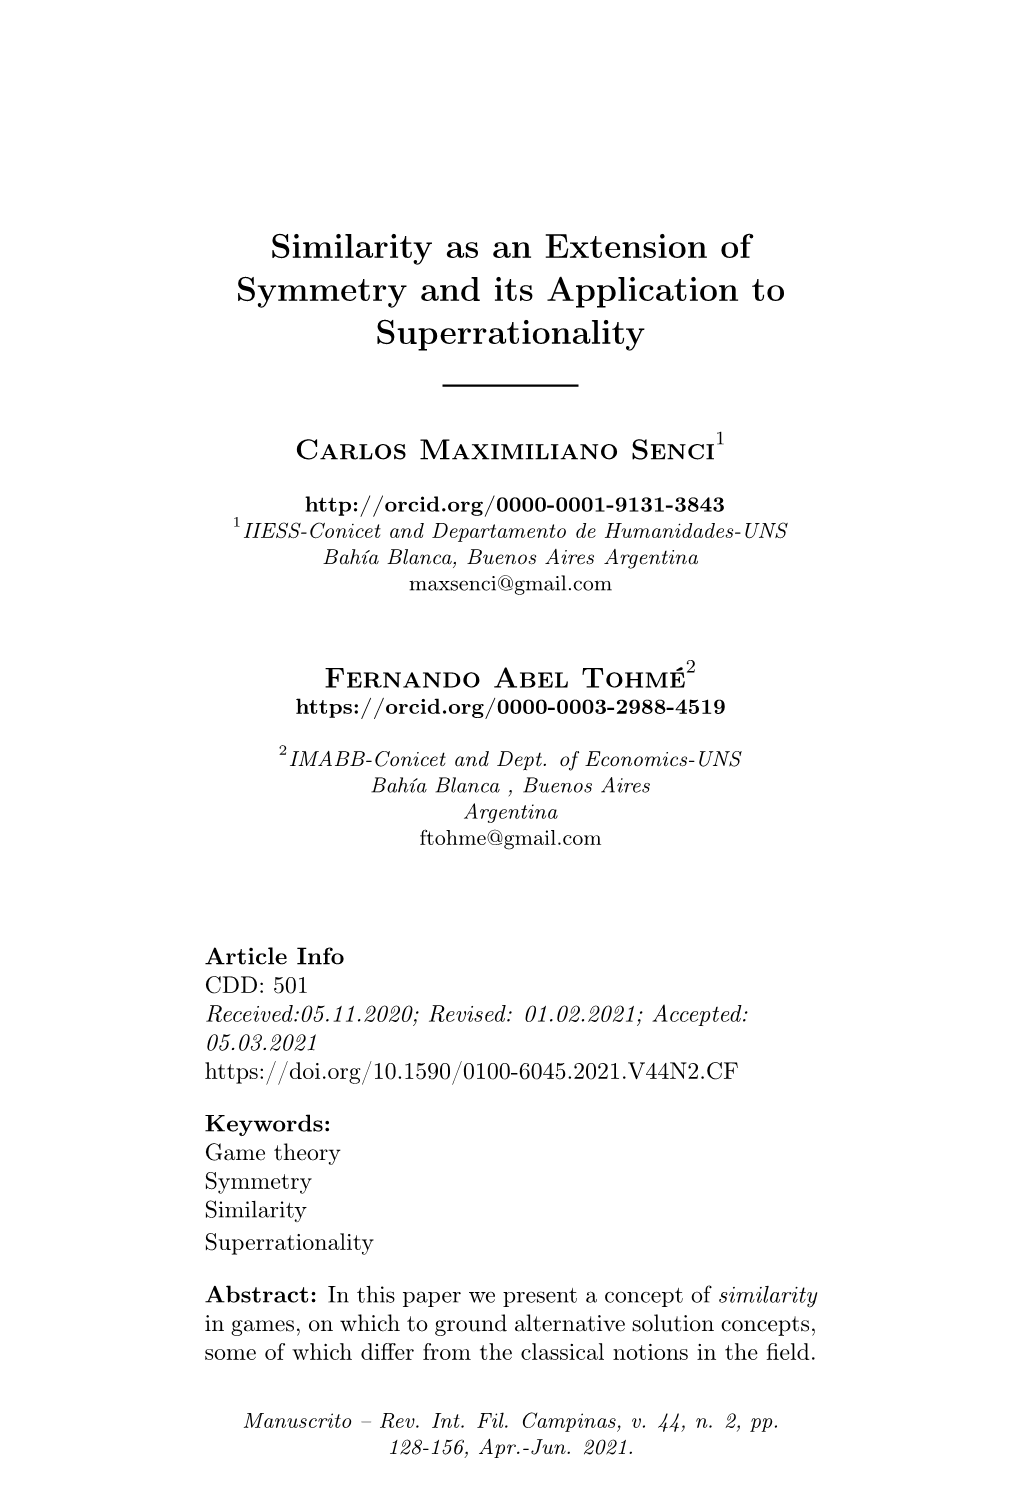 Similarity As an Extension of Symmetry and Its Application to Superrationality